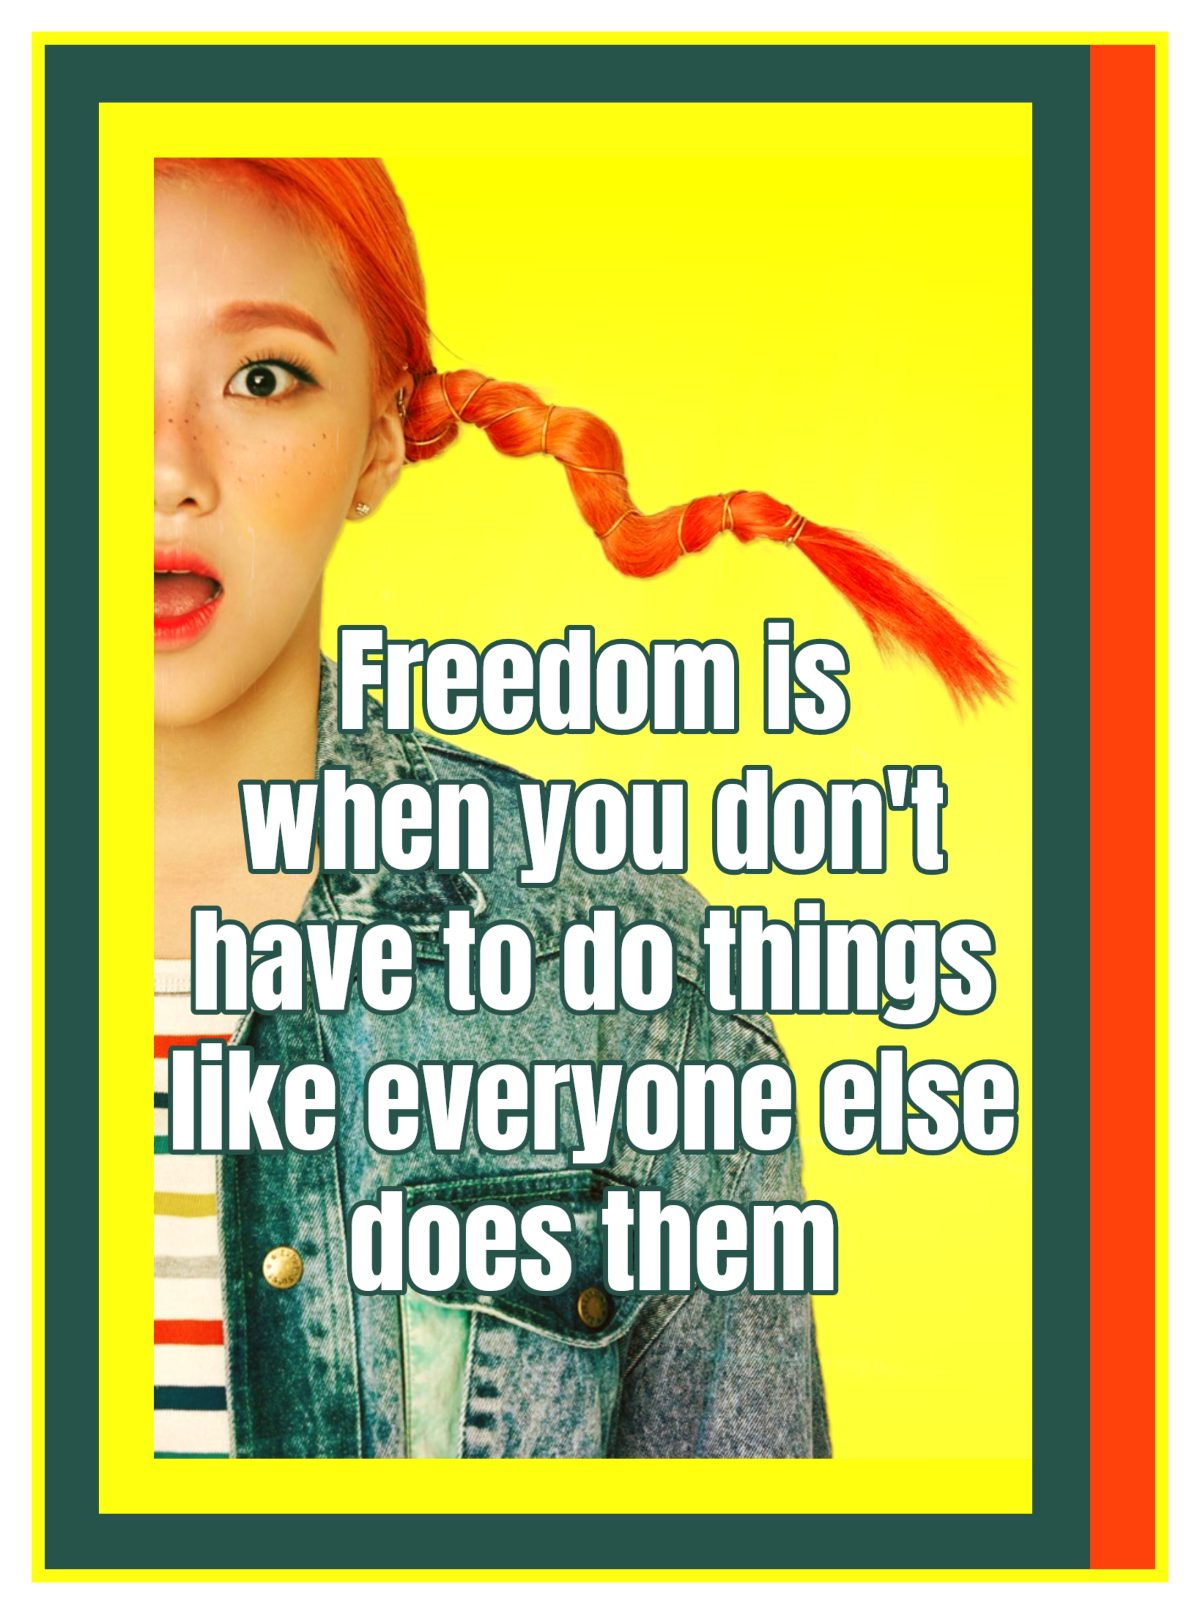 Astrid Lindgren Quote Freedom is when you don't have to do things like everyone else does them. Bekitschig blog